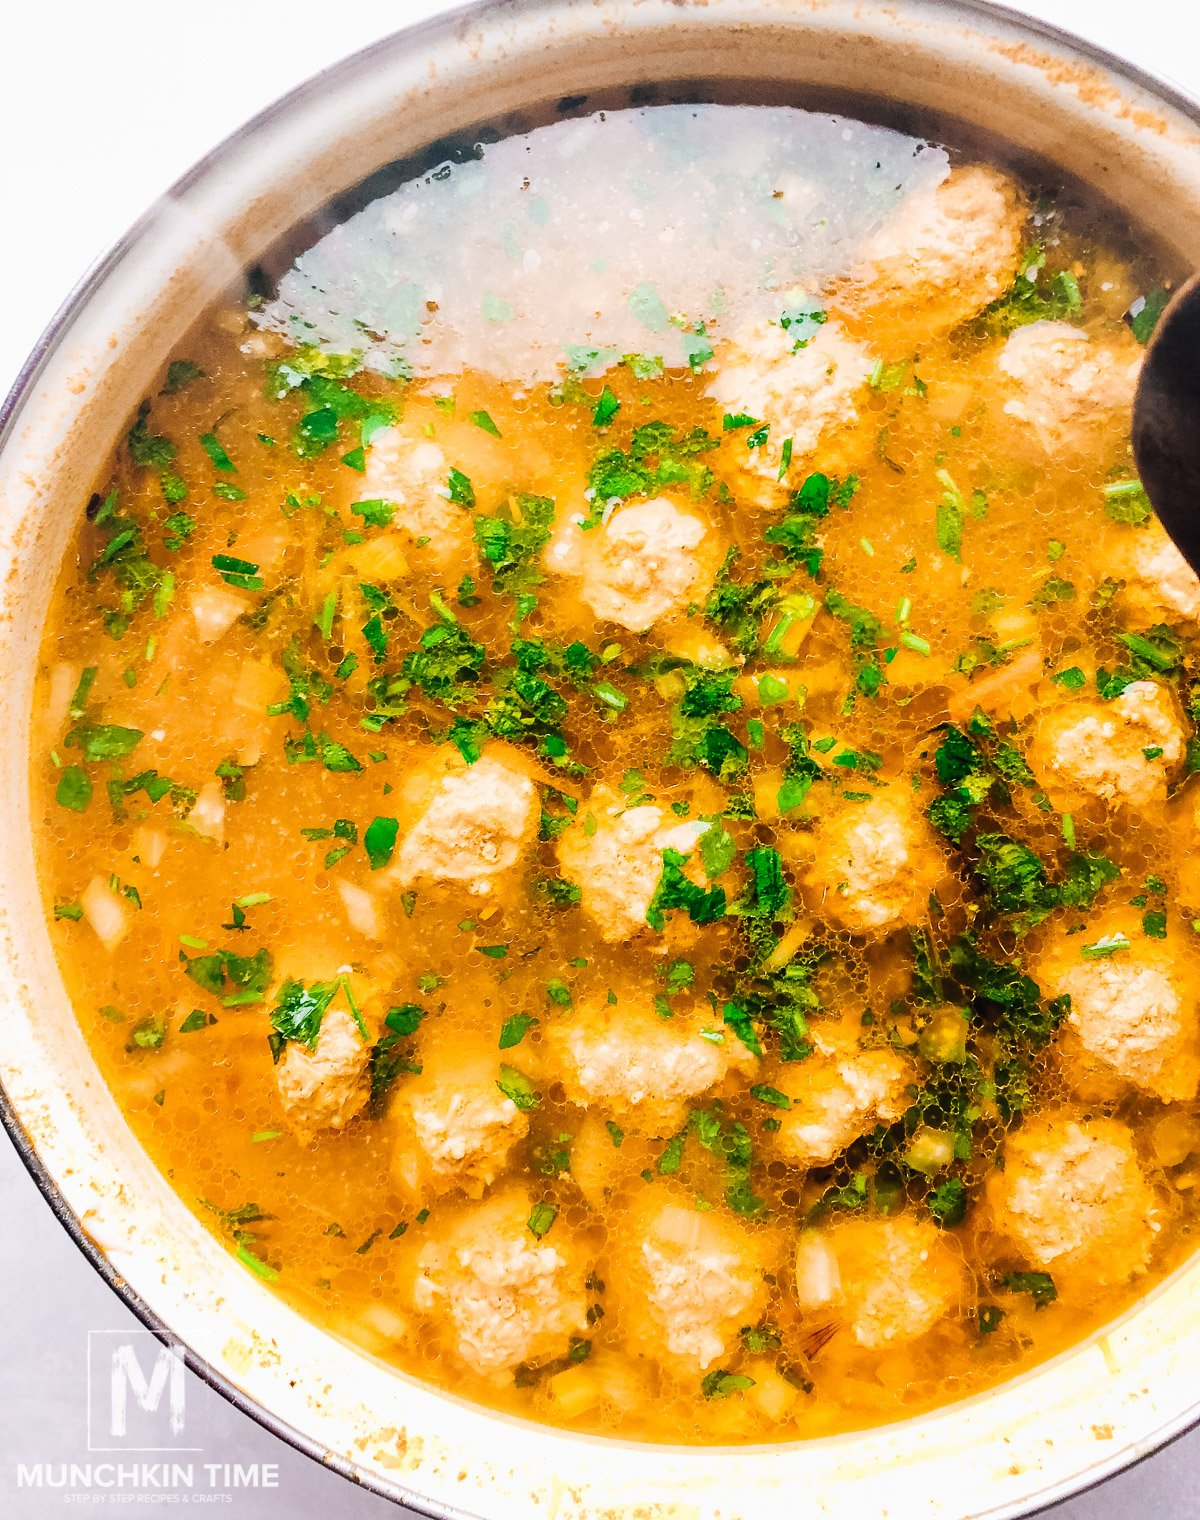 Chicken Meatball Soup Recipe with Rice